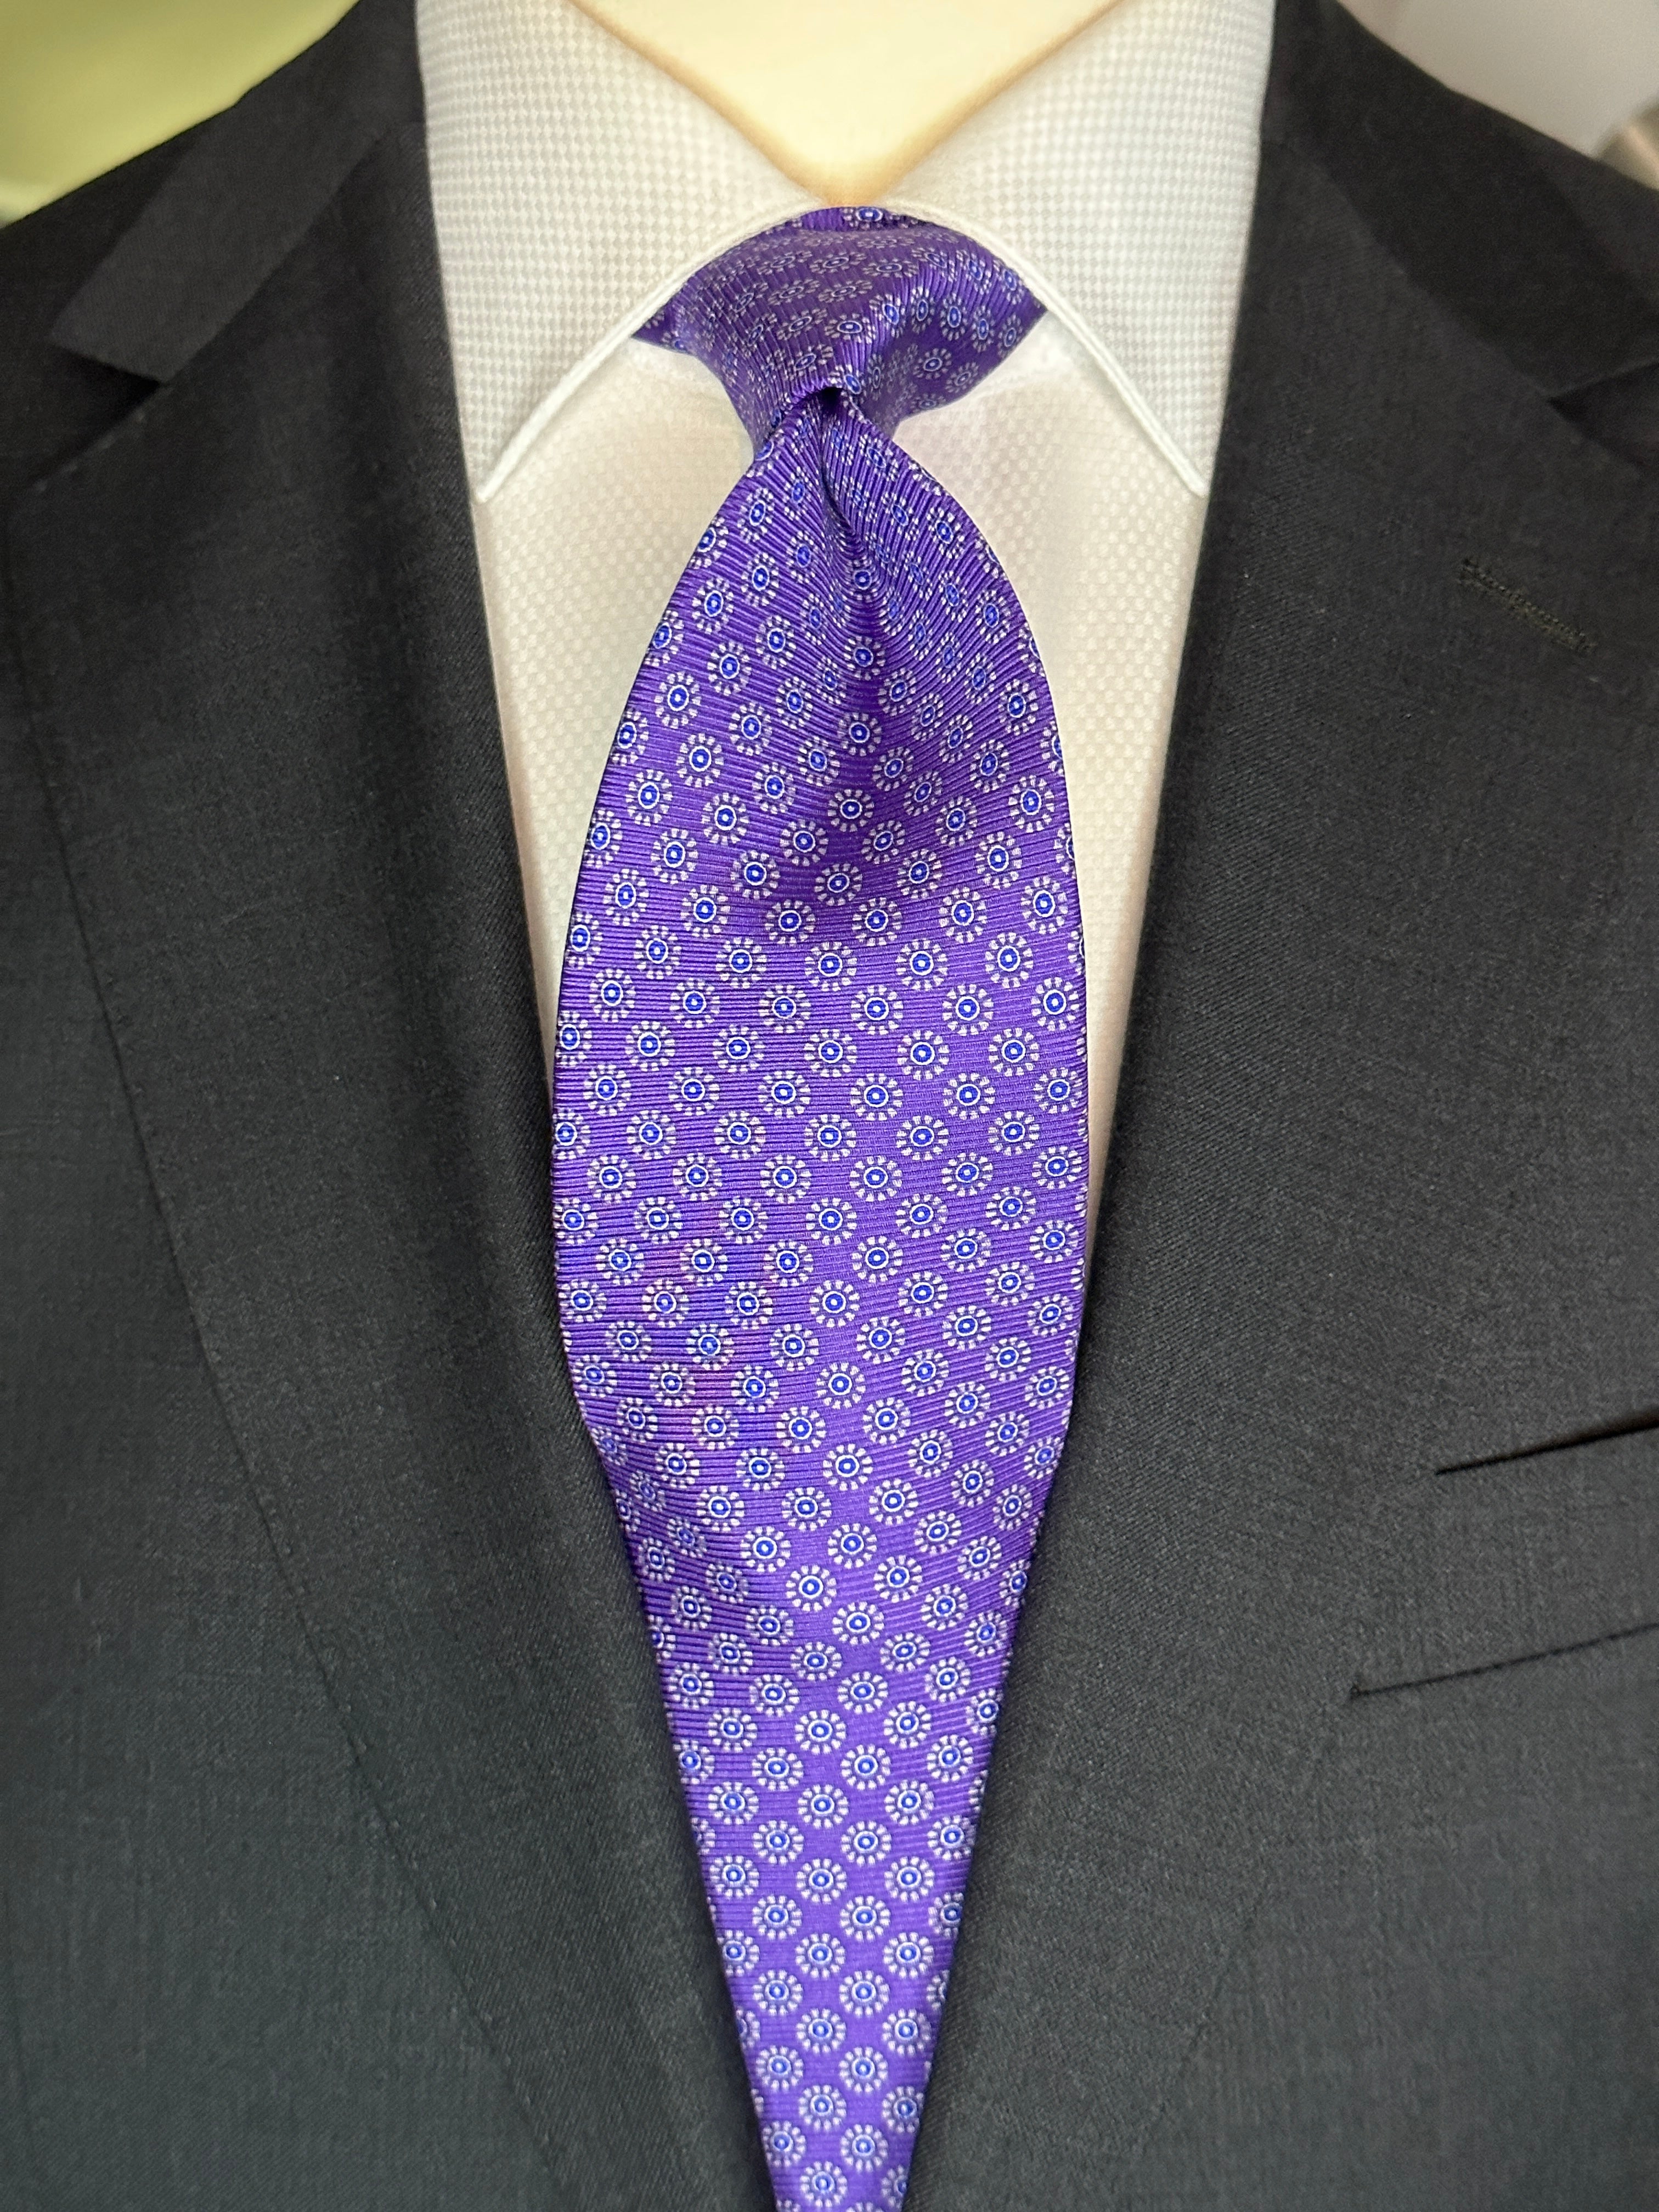 SUITCAFE Silk Tie Lavender With Small Chalk Floret Circles Twill